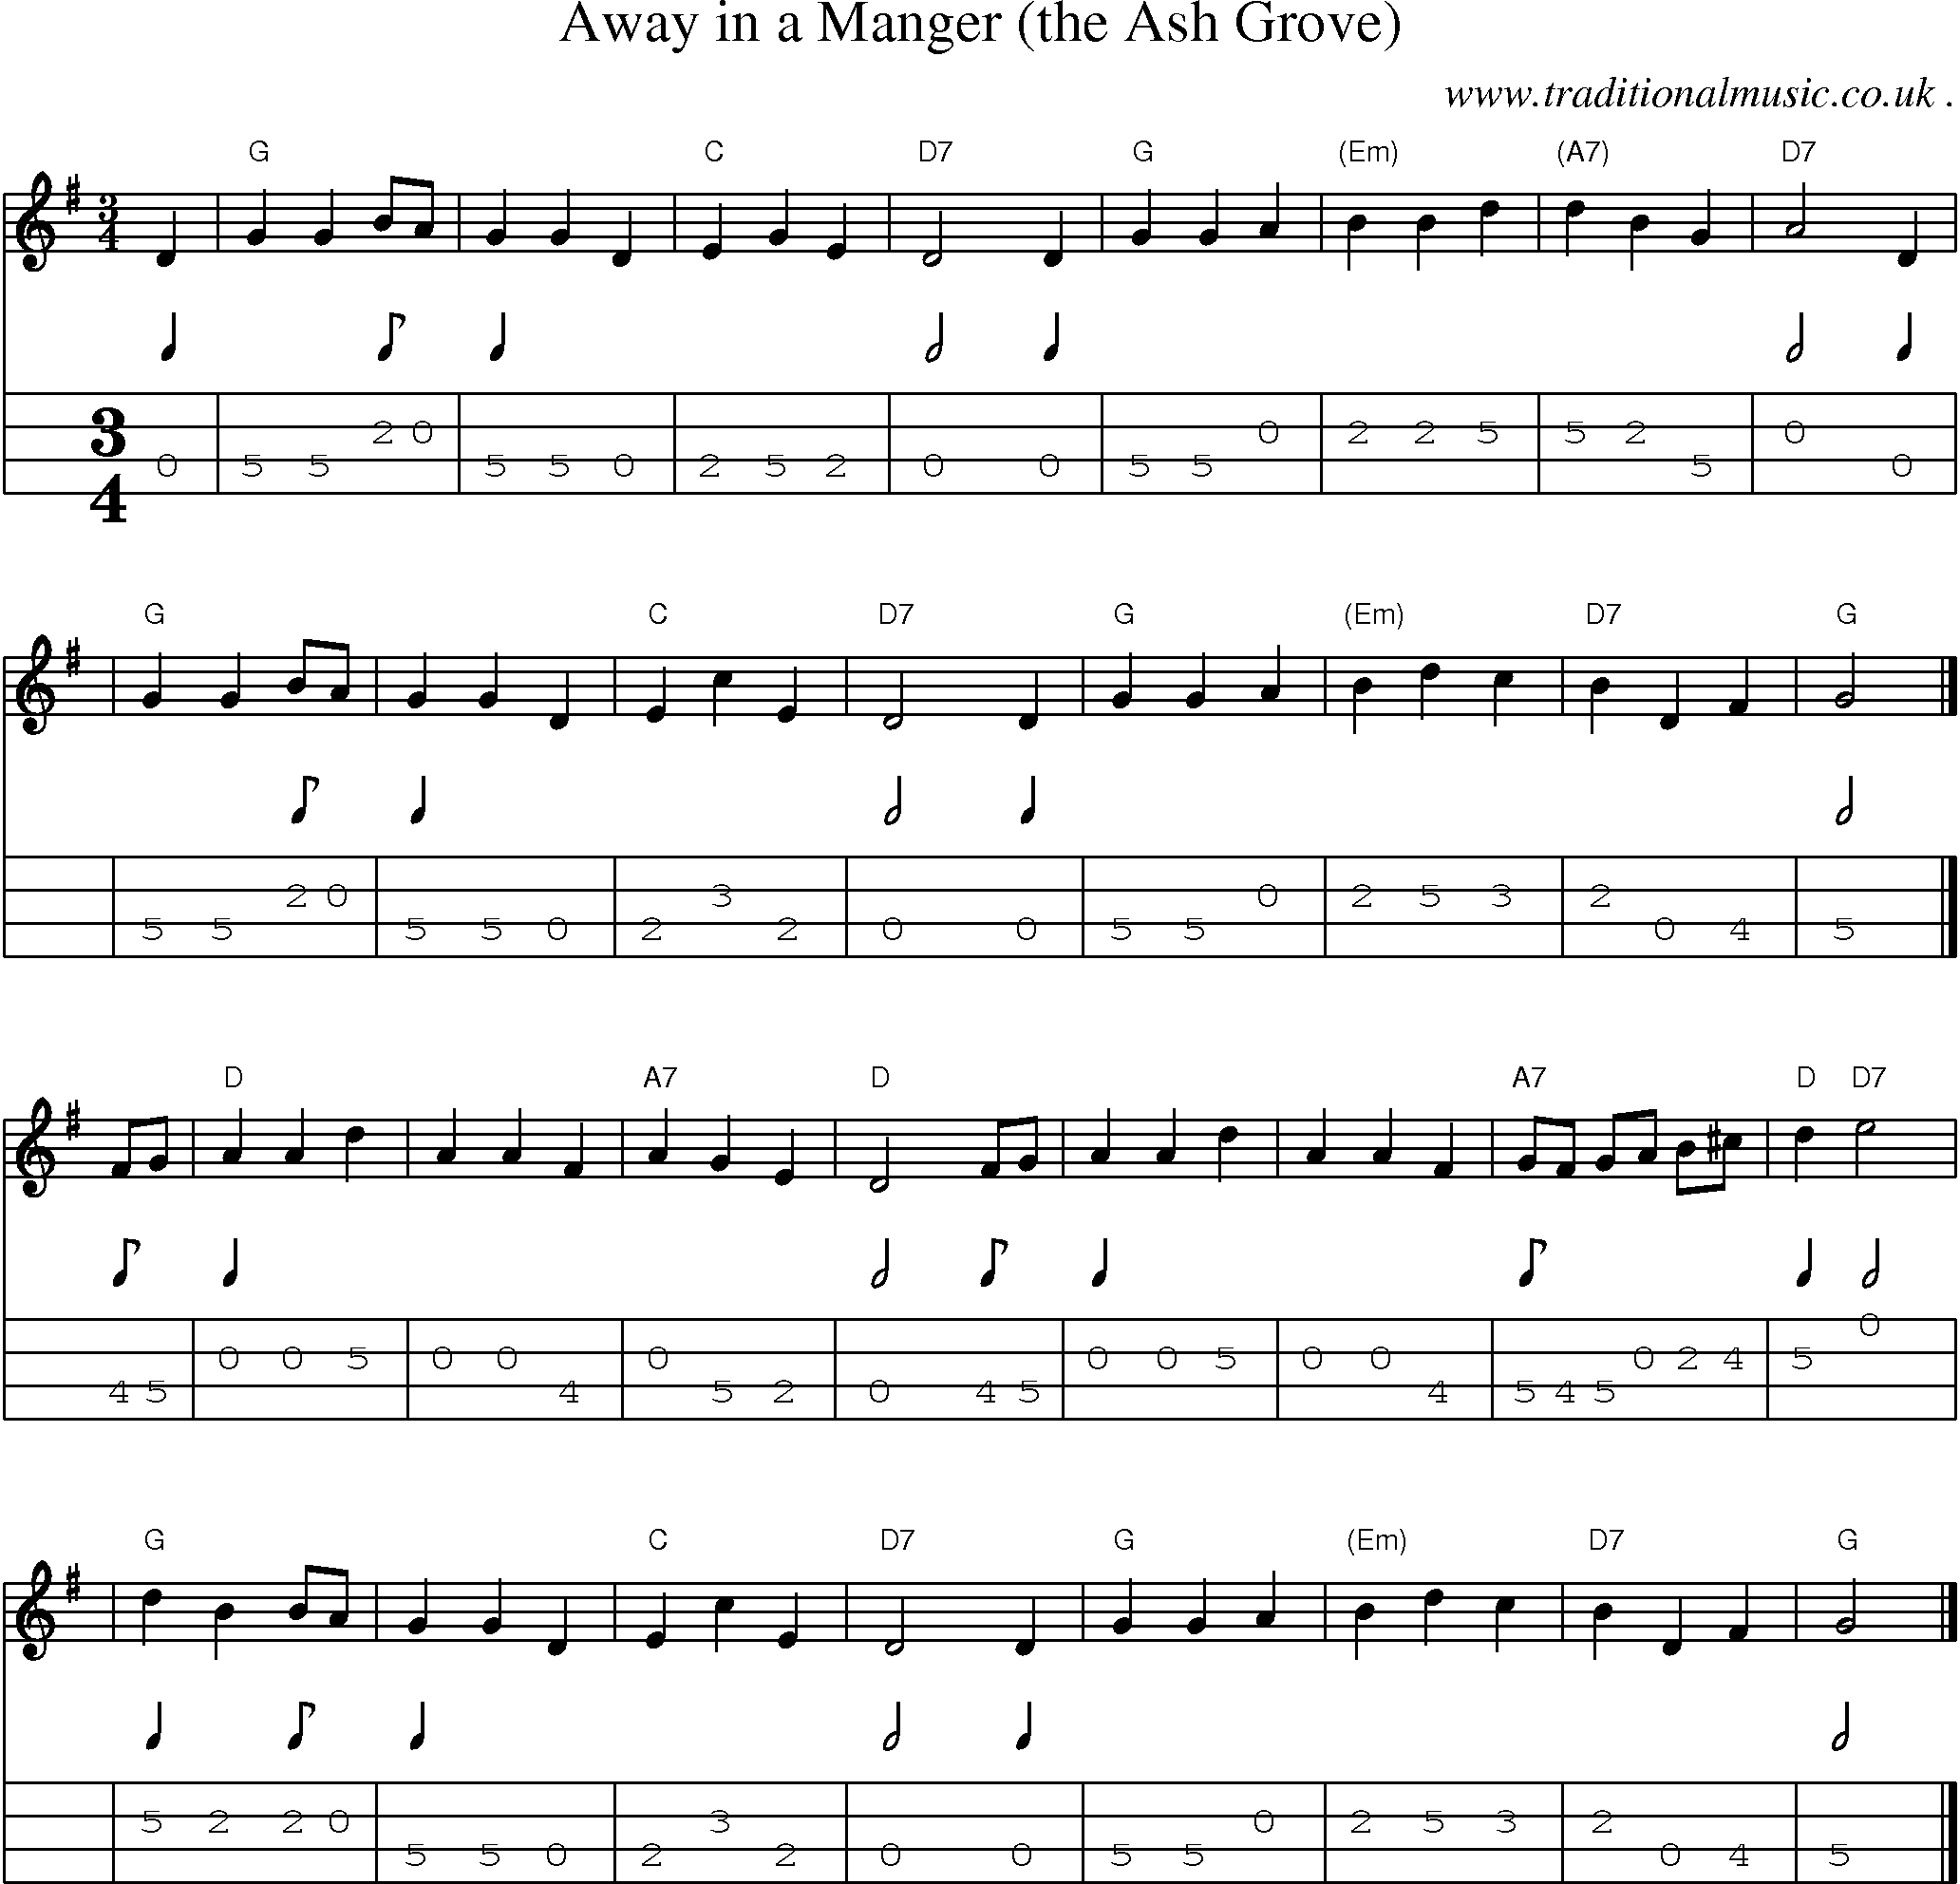 Sheet-music  score, Chords and Mandolin Tabs for Away In A Manger The Ash Grove